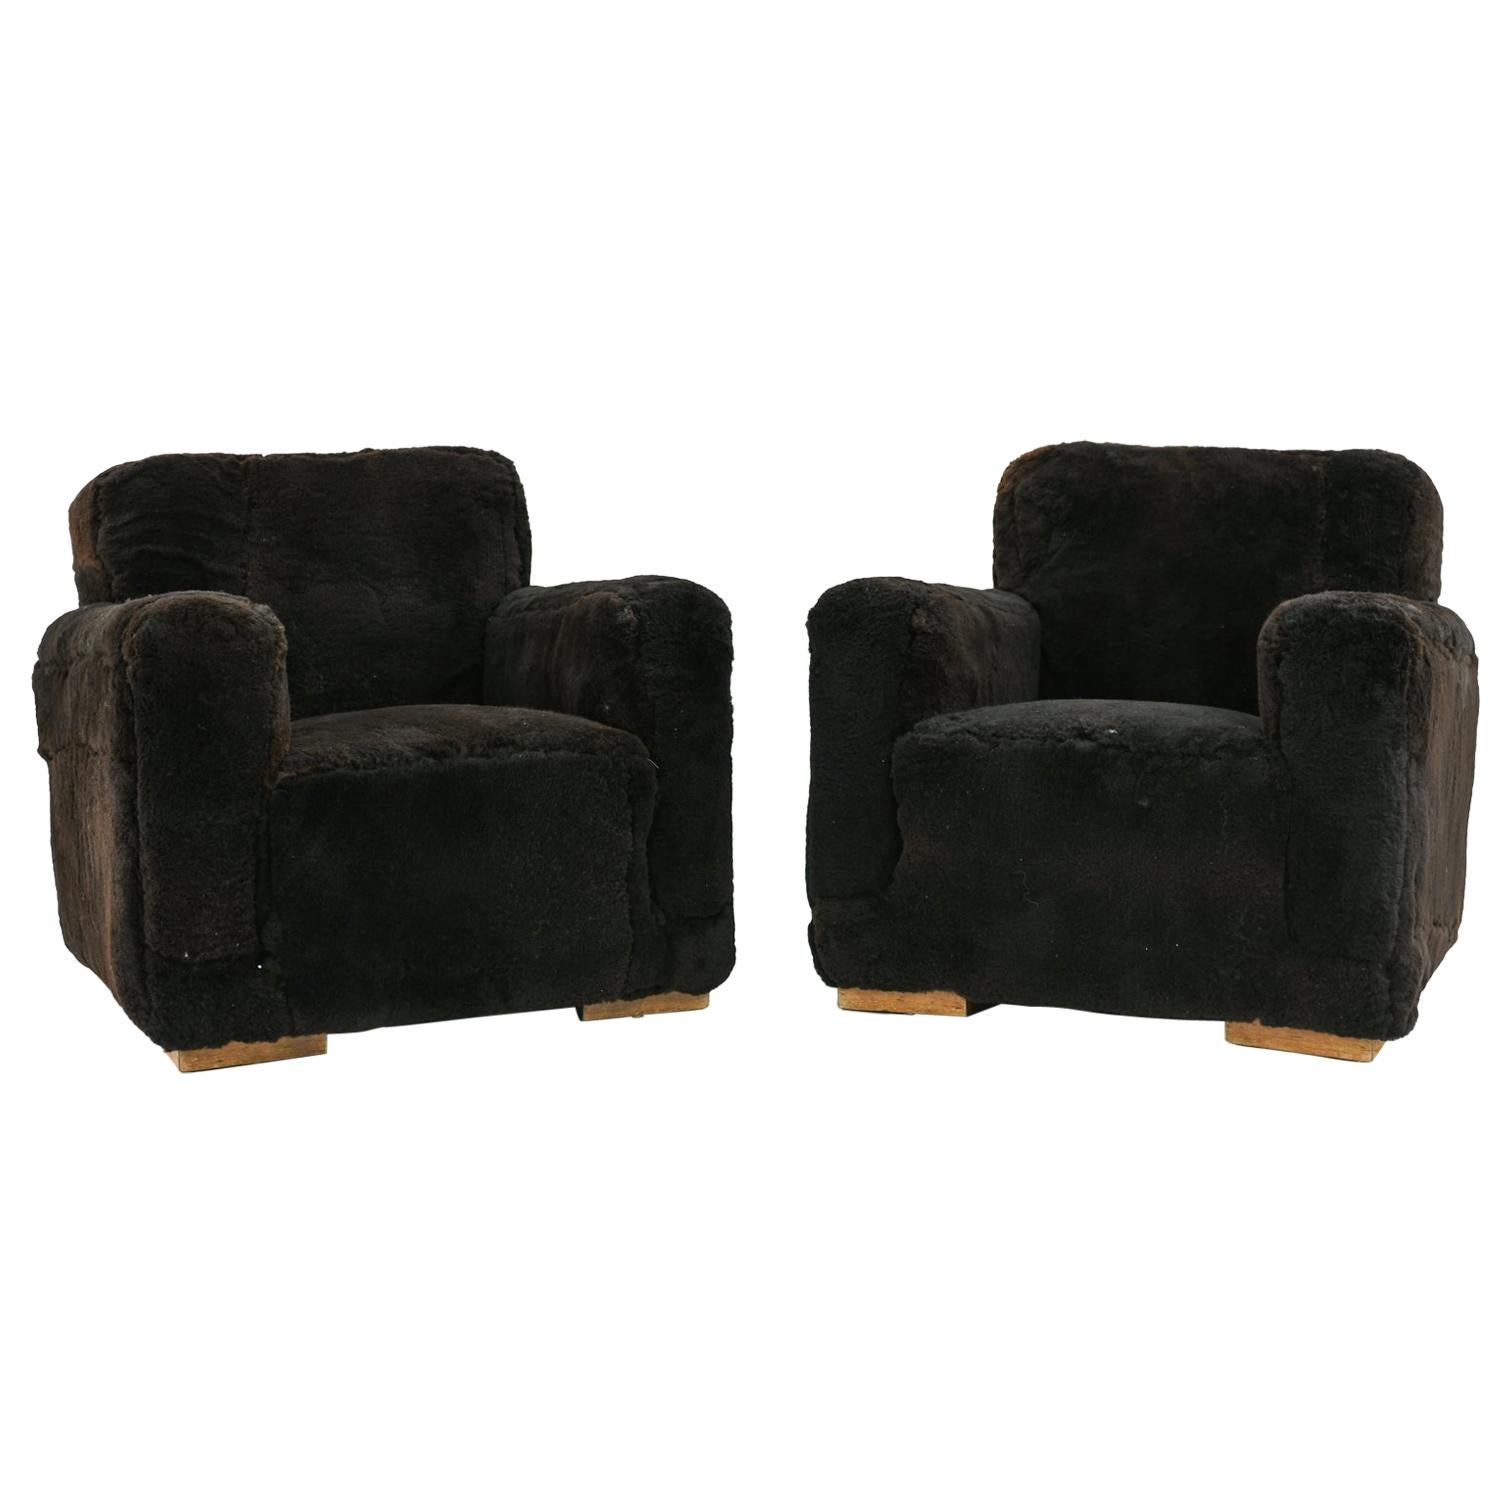 Pair of French Art Deco Club Chairs in Brown Lamb's Wool